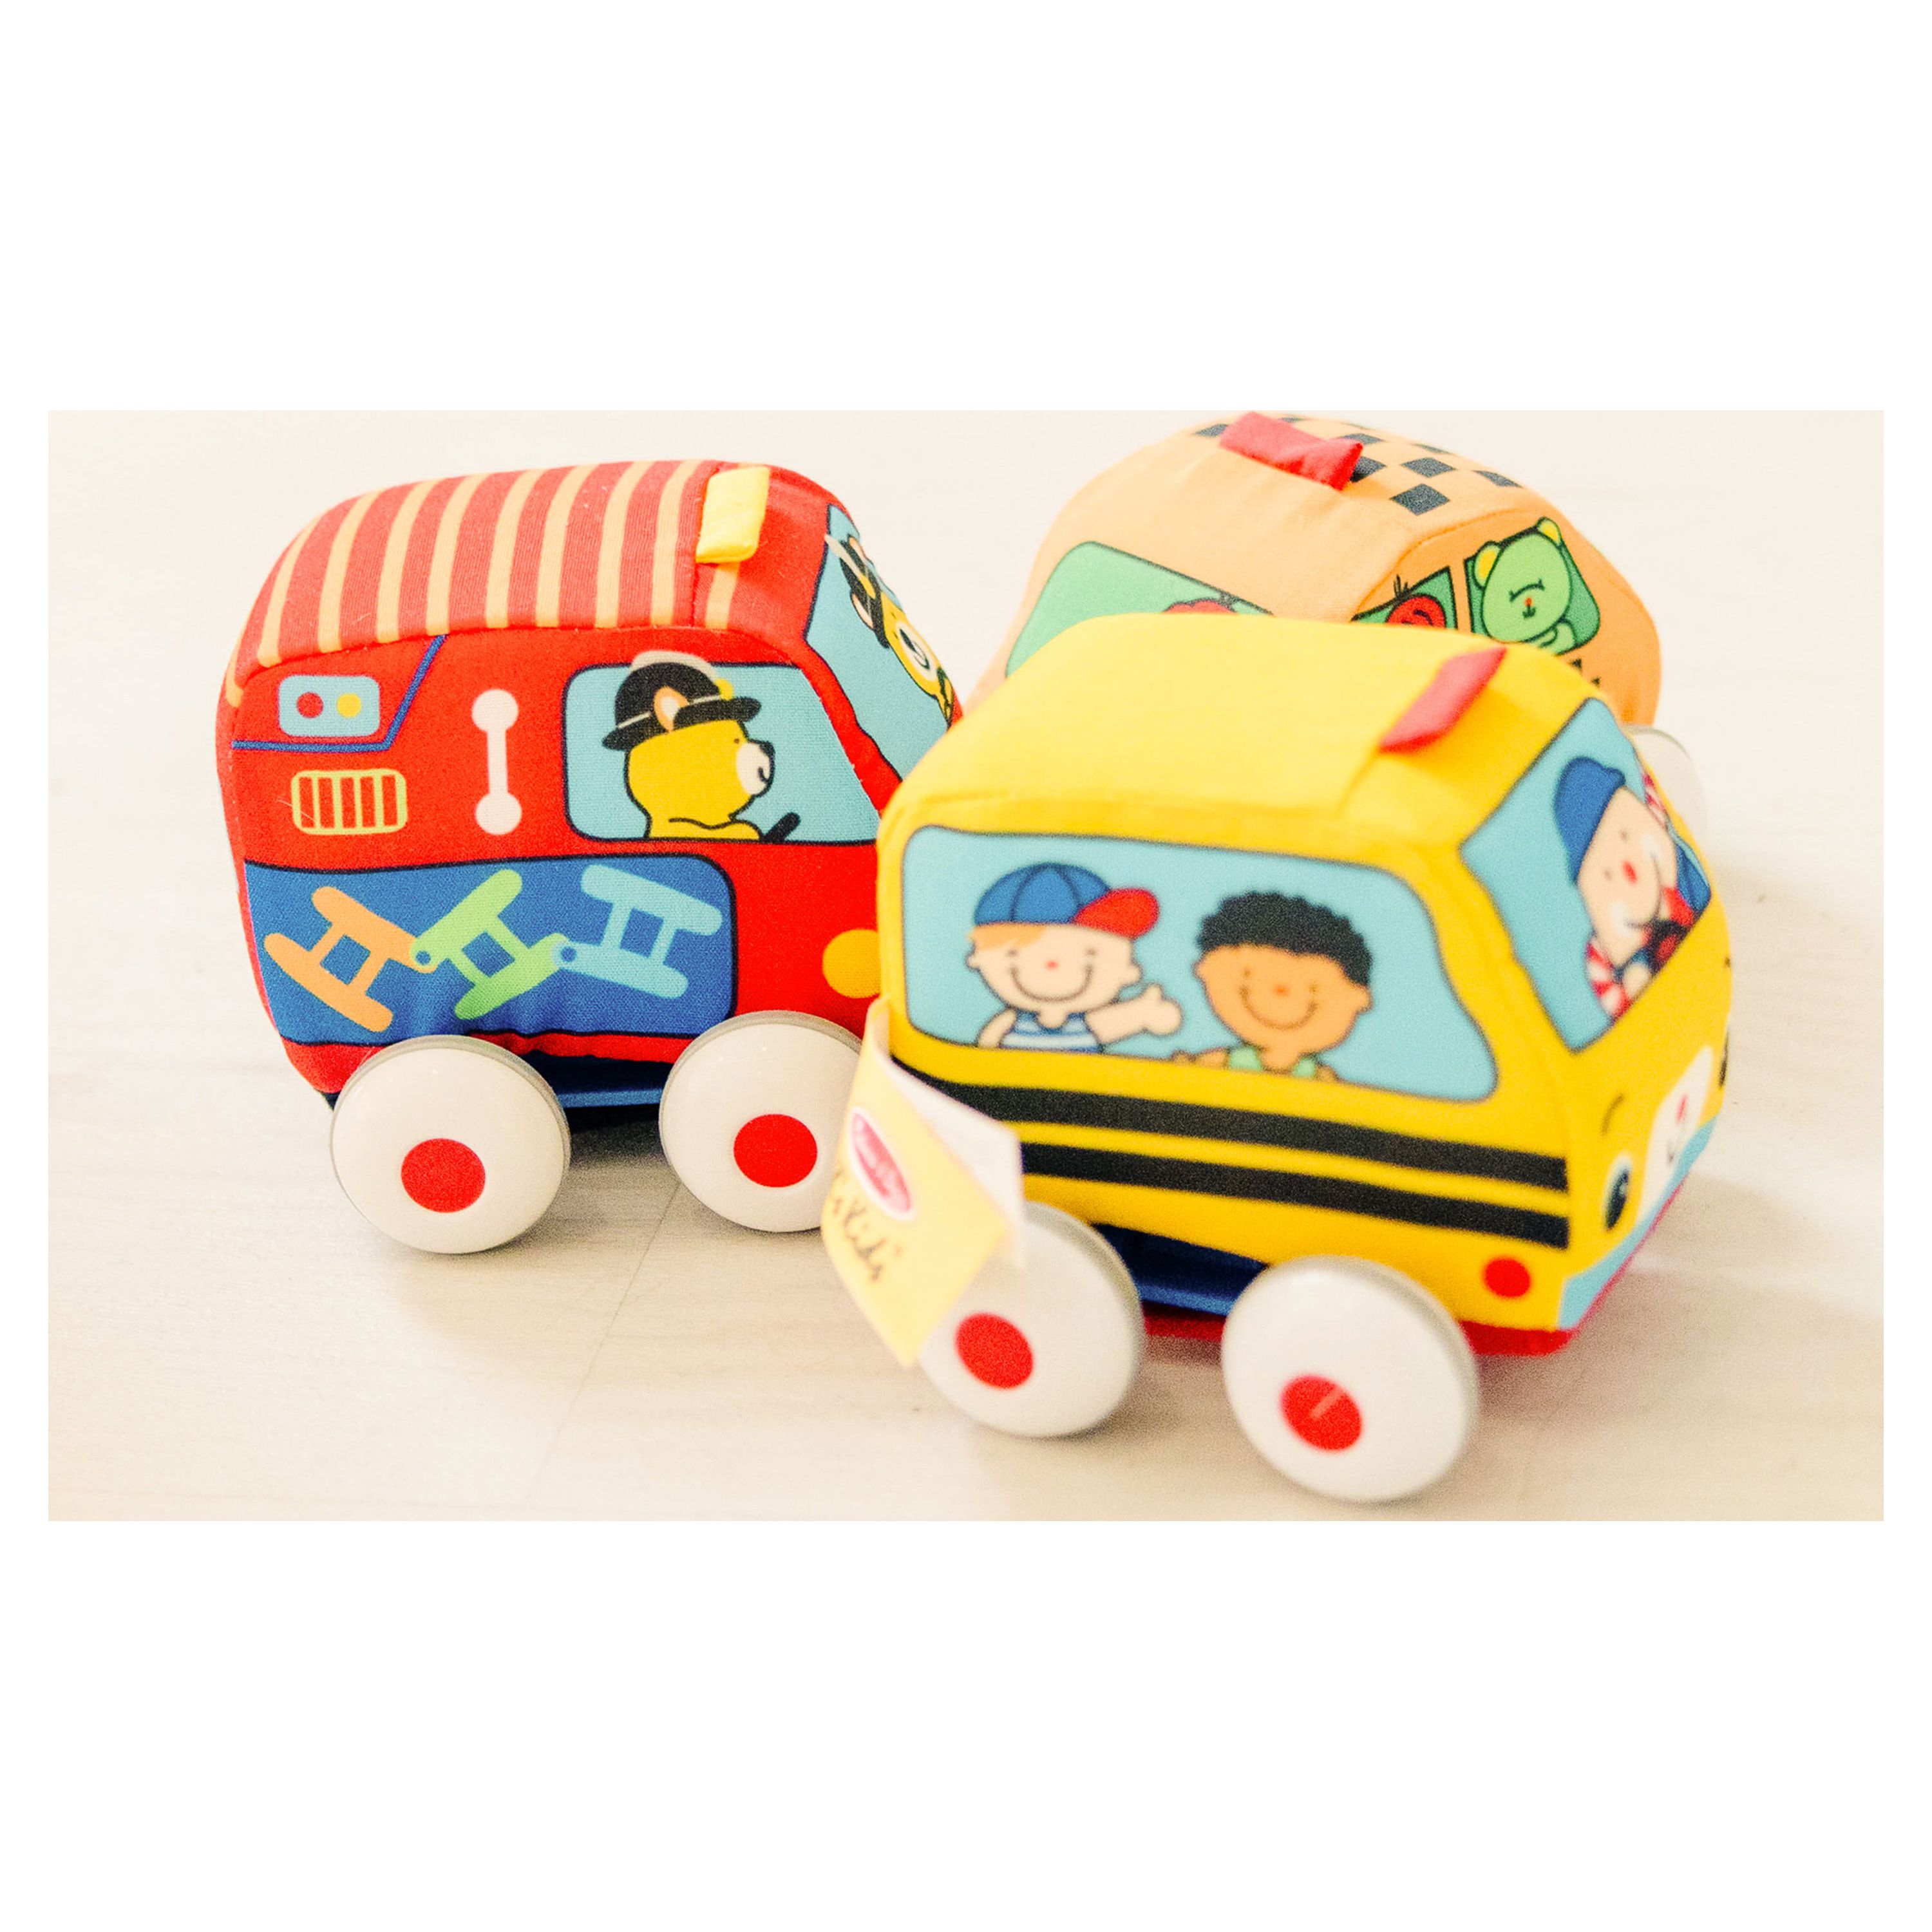 Trucks　Cars　Baby　Case　Set　Vehicle　With　Carrying　Pull-Back　Toy　Melissa　and　Kids　and　Doug　Set　K's　Soft